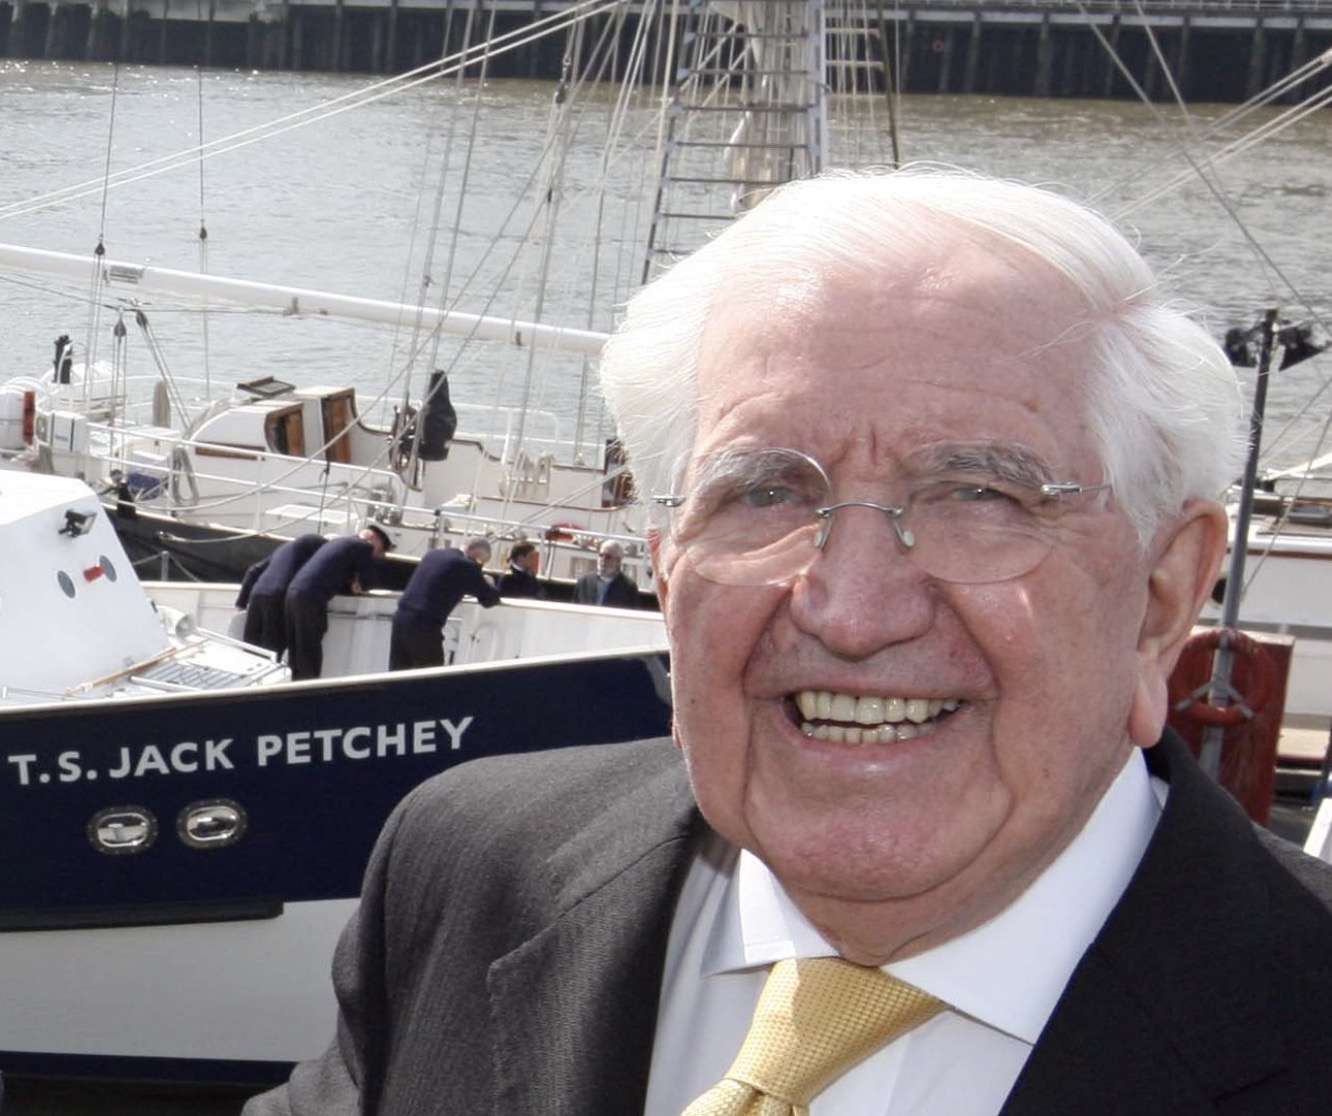 Sir Jack Petchey, who invested millions into young people, dies aged 98